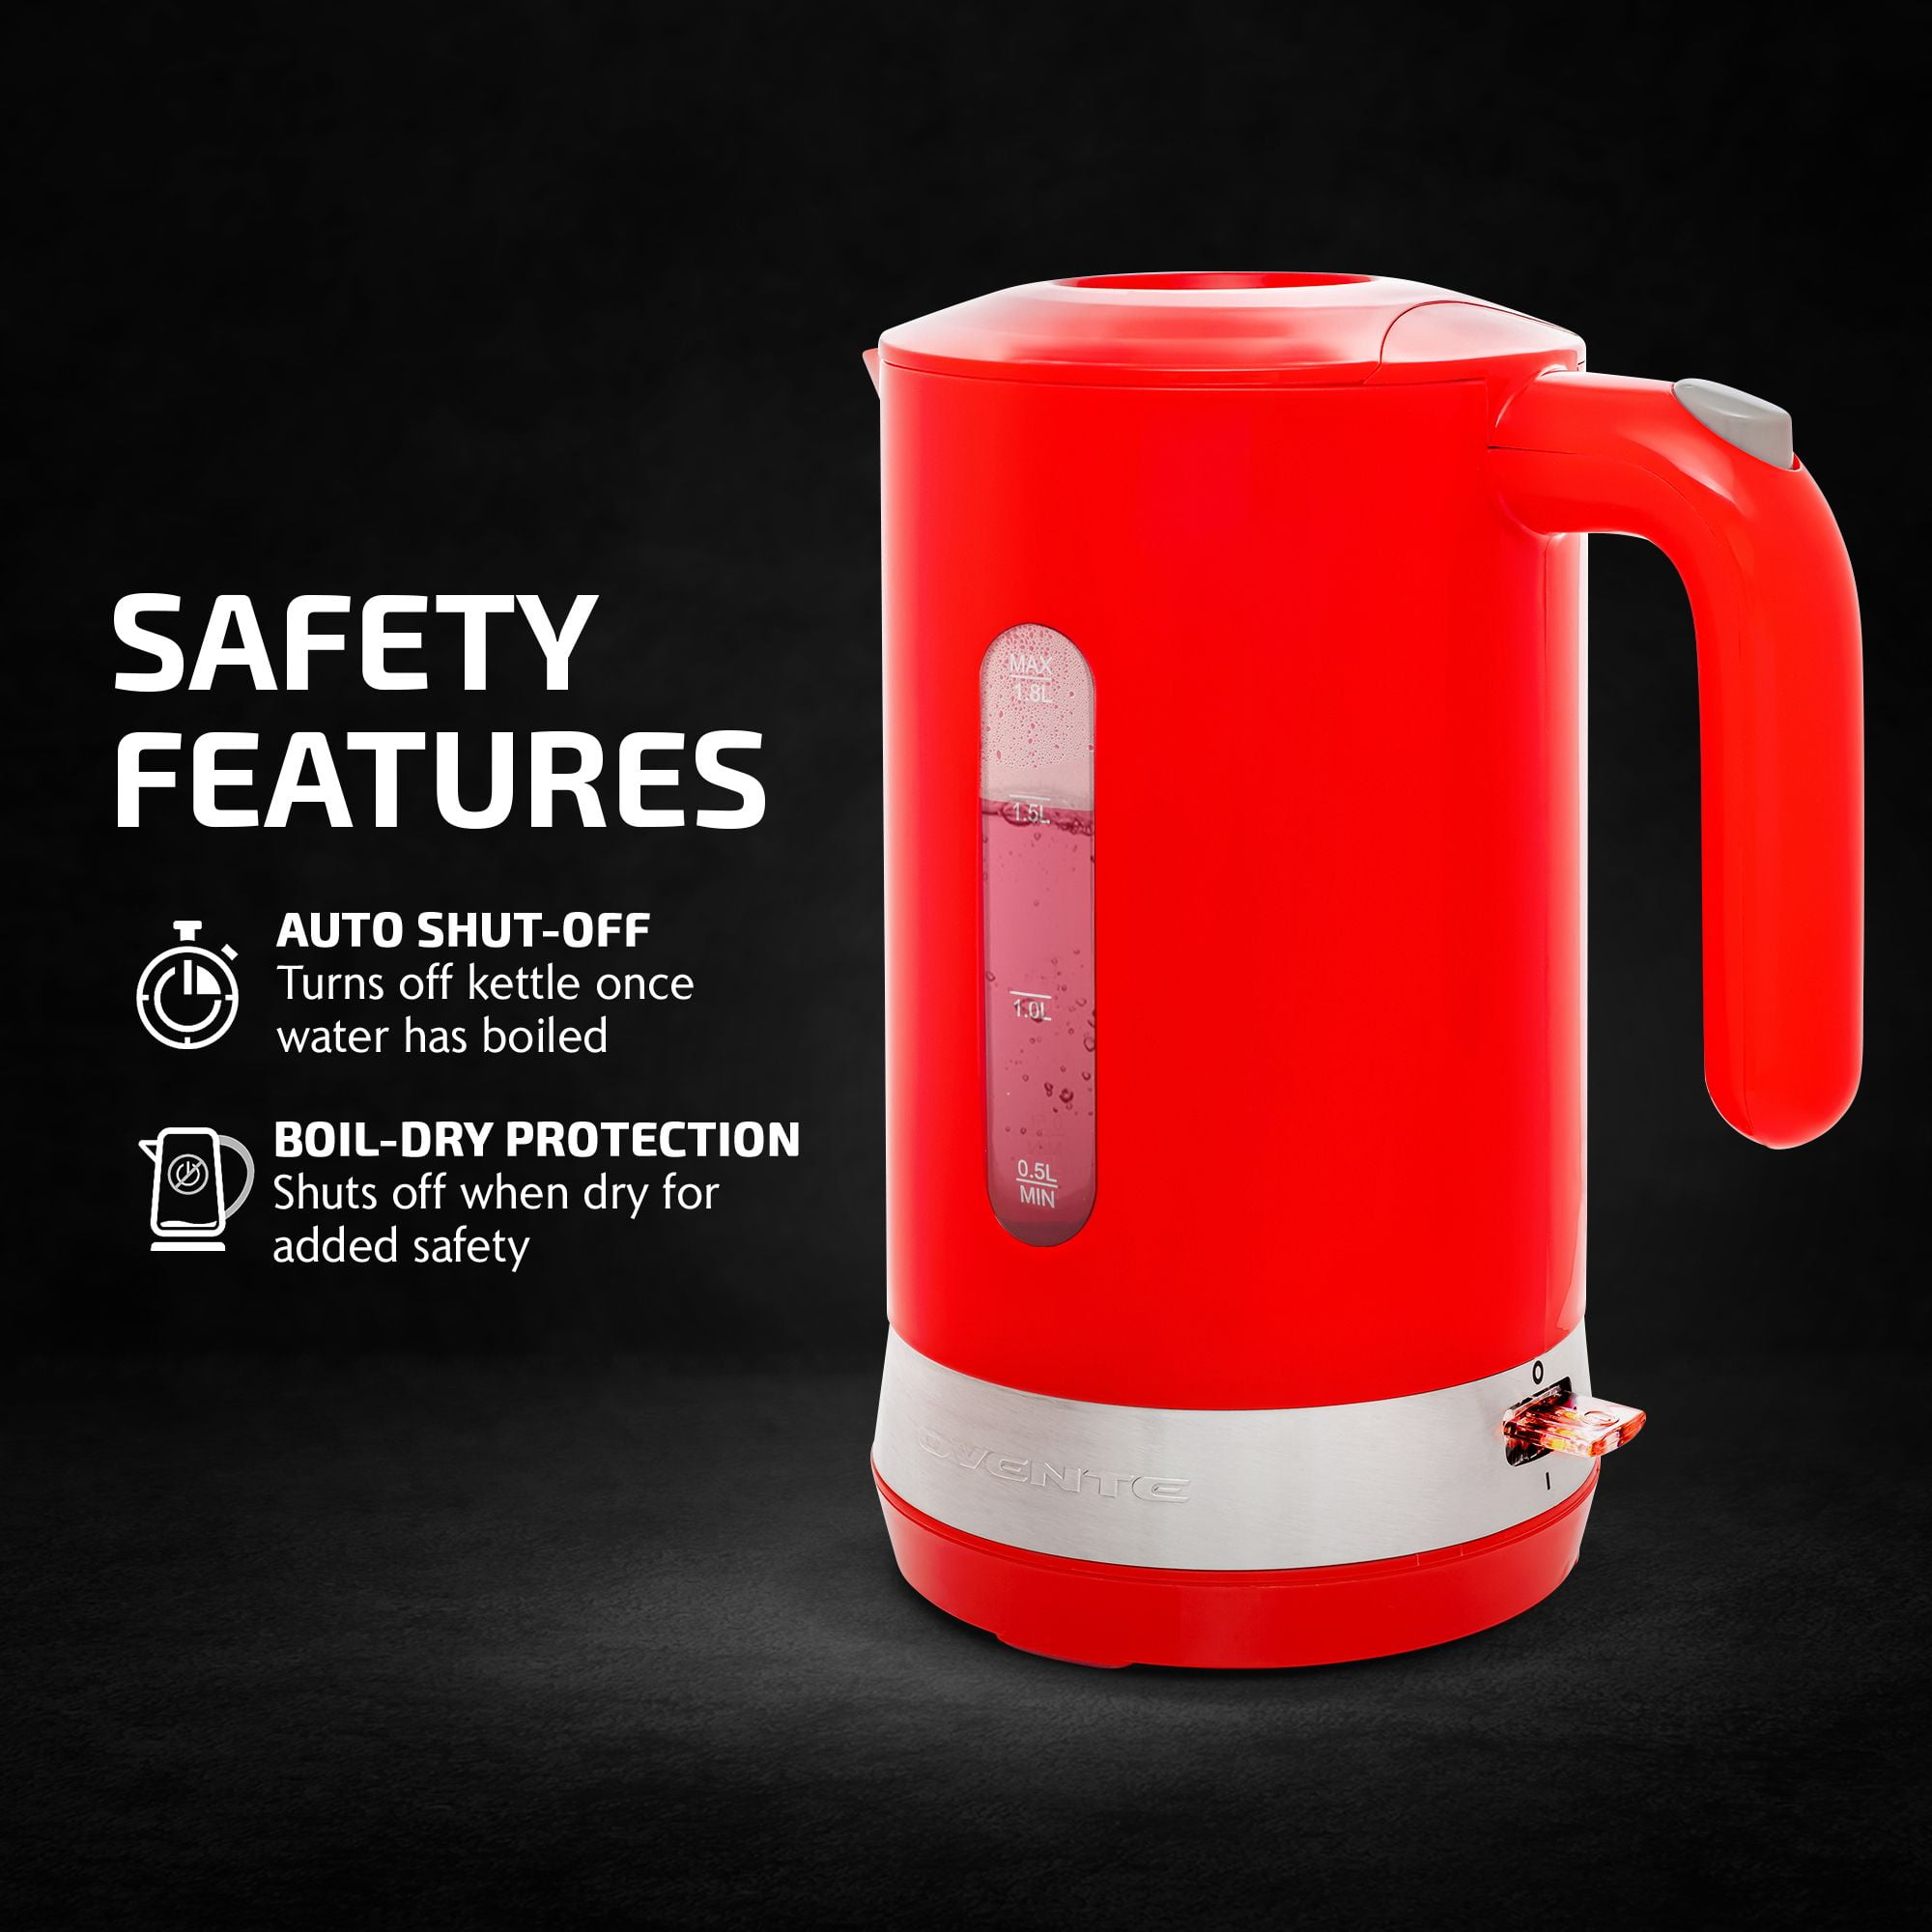 OVENTE Illuminated 6.5-Cup Red Electric Kettle with Filter, Fast Heating  and Auto-Shut Off KG83R - The Home Depot